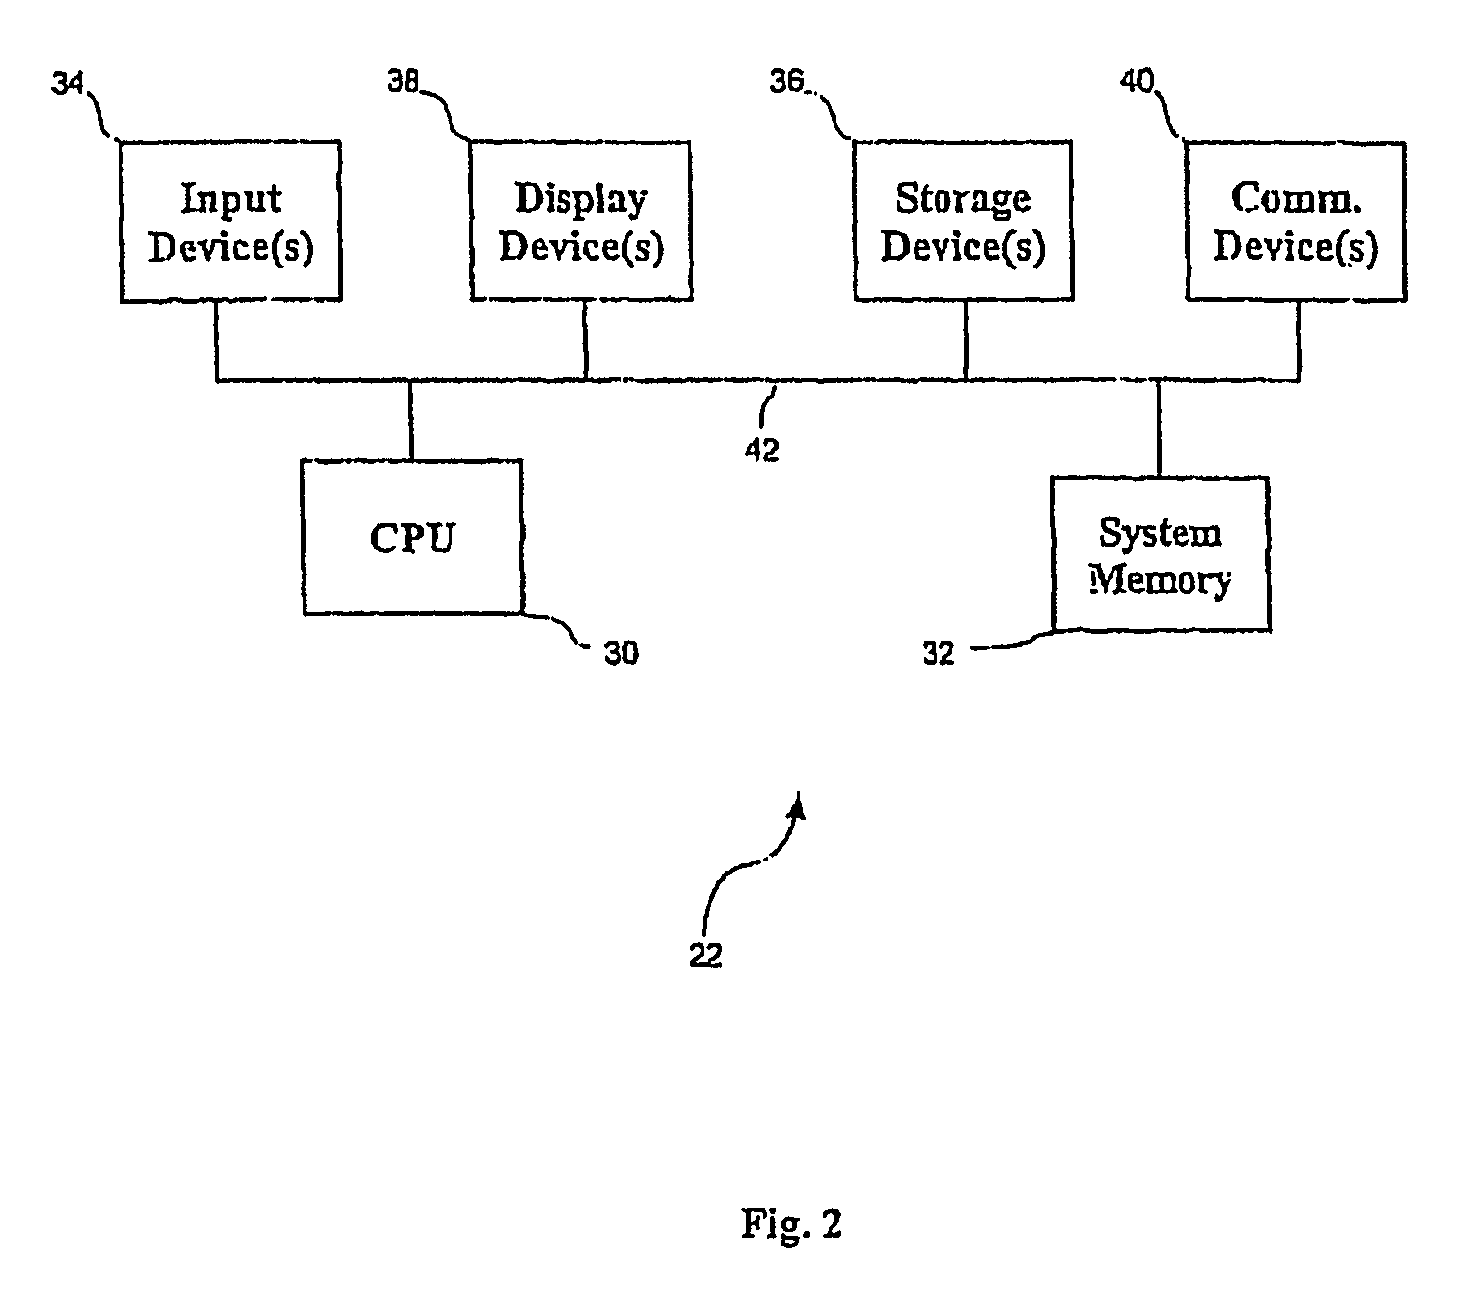 Method and apparatus for guiding a medical instrument to a subsurface target site in a patient